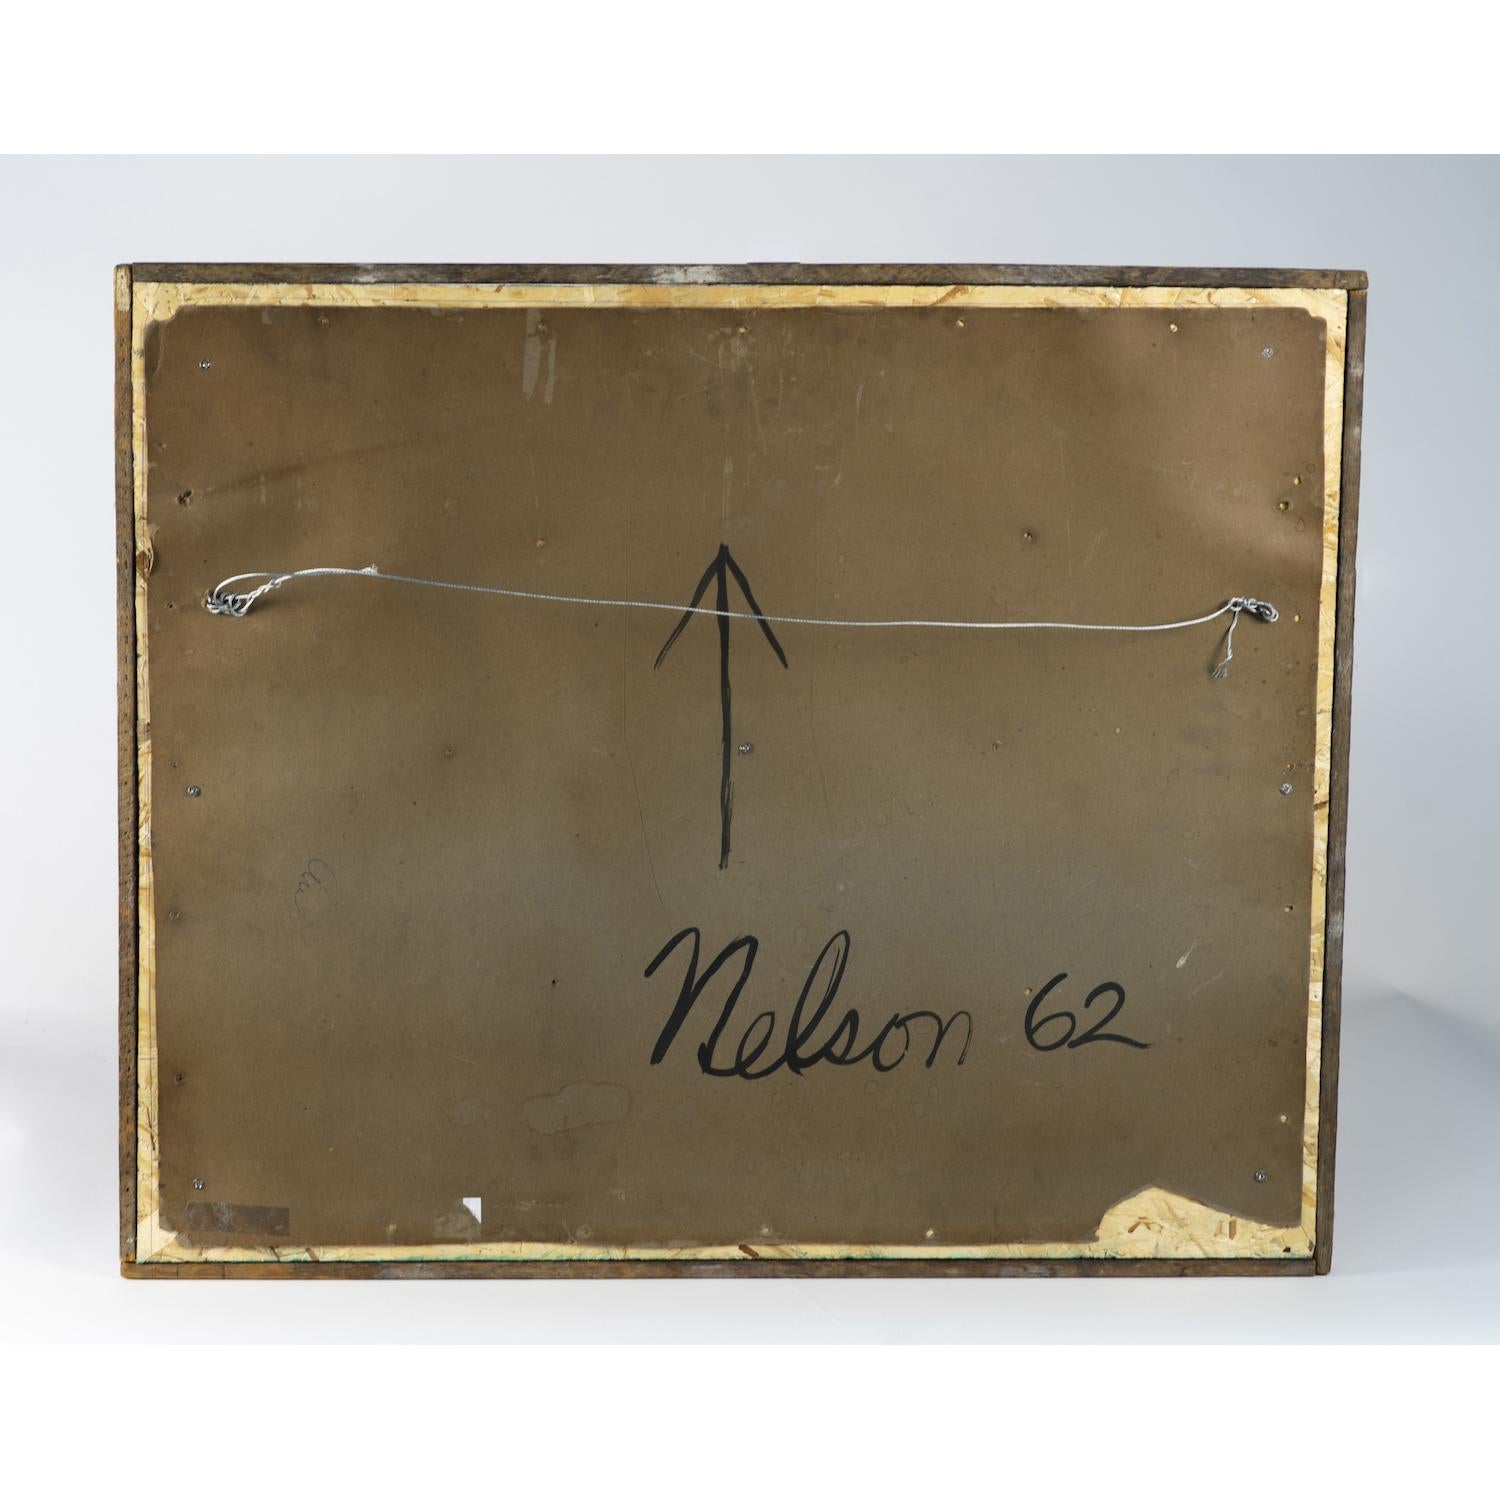 Mixed-Media Abstract, Signed Nelson, Dated 1962 on Verso In Good Condition For Sale In Waltham, MA